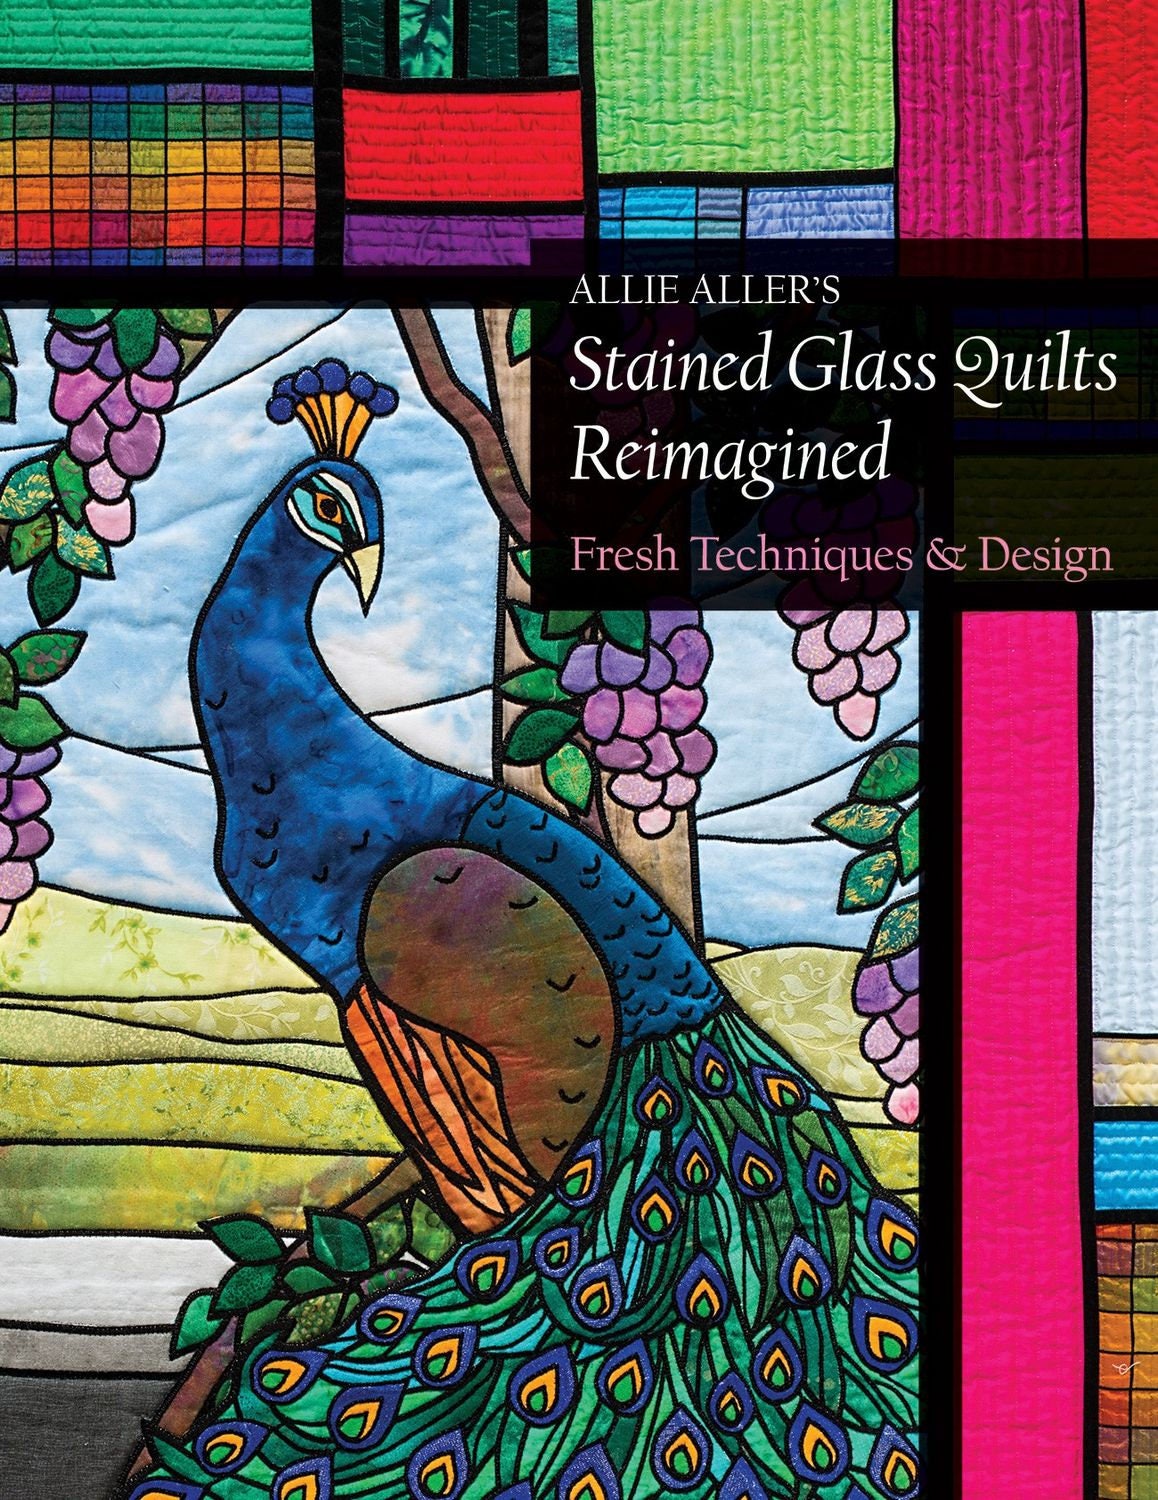 Stained Glass Quilts Reimagined Quilt Pattern Book by Allie Aller for C&T Publishing